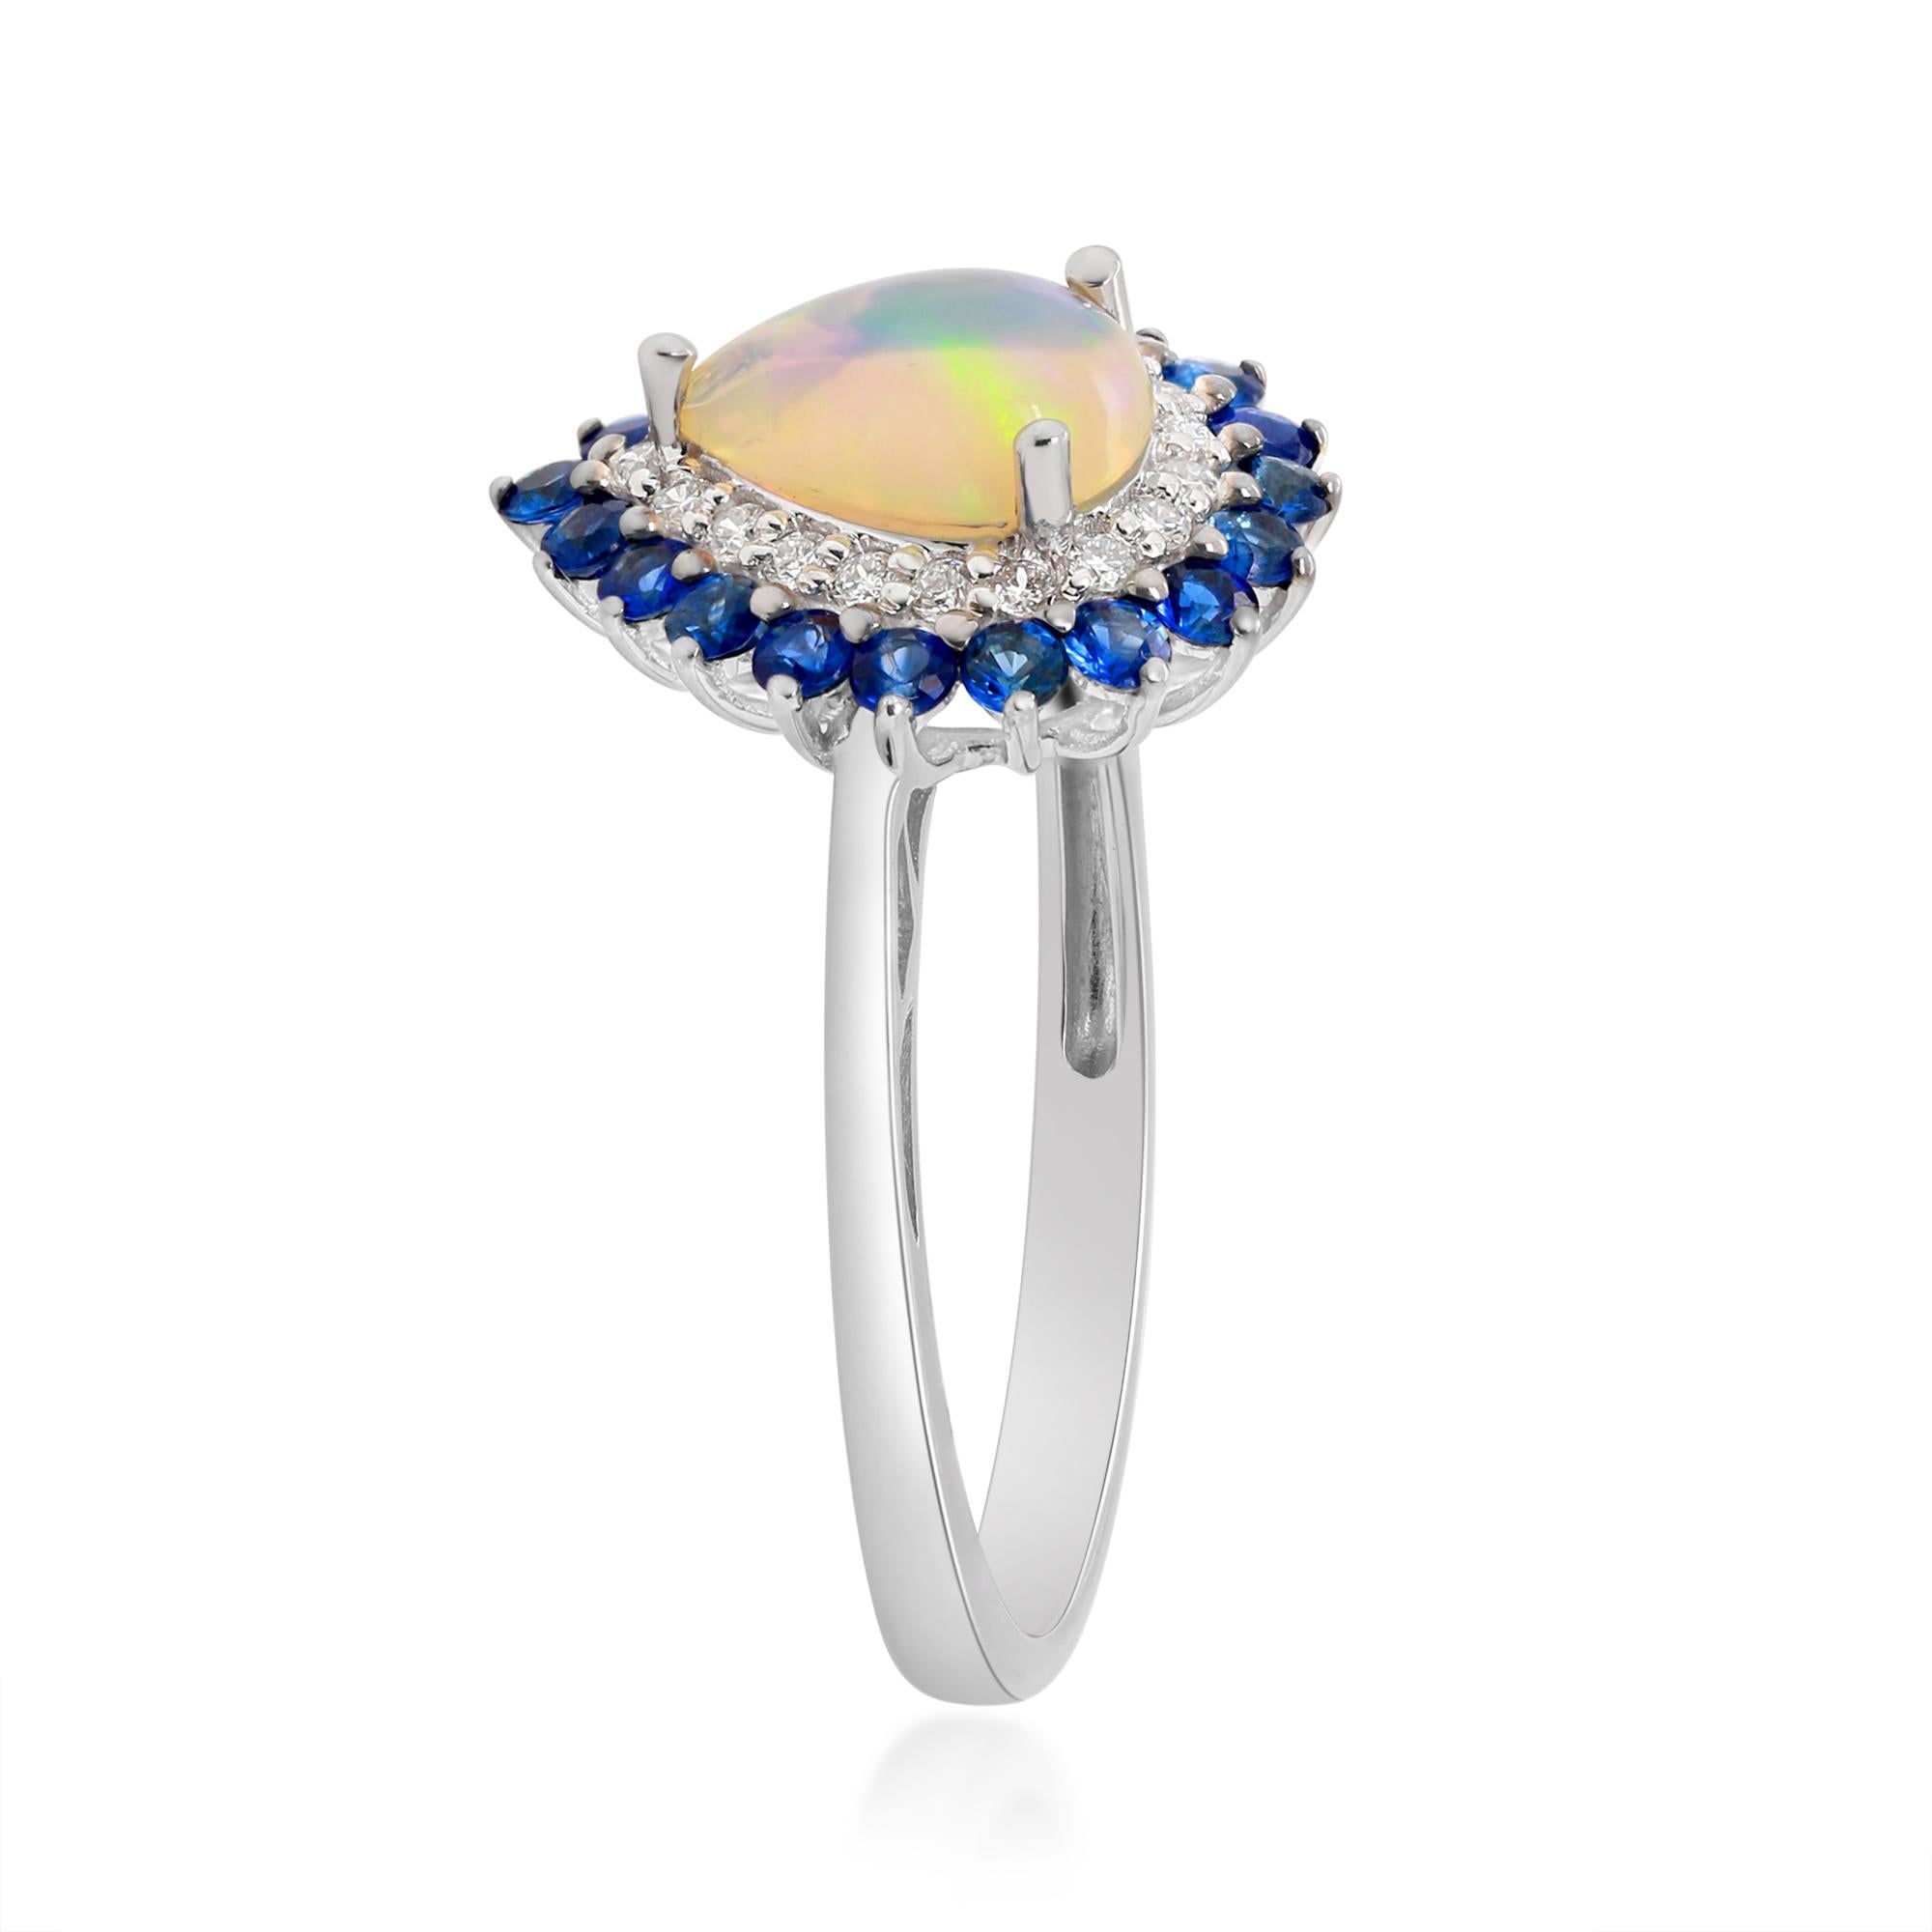 Decorate yourself in elegance with this Ring is crafted from 10-karat White Gold by Gin & Grace. This Ring is made up of 6x8 mm Pear-Cab (1 pcs) 0.65 carat Ethiopian Opal, Round-cut Blue Sapphire (19 pcs) 0.46 carat and Round-cut White Diamond (19